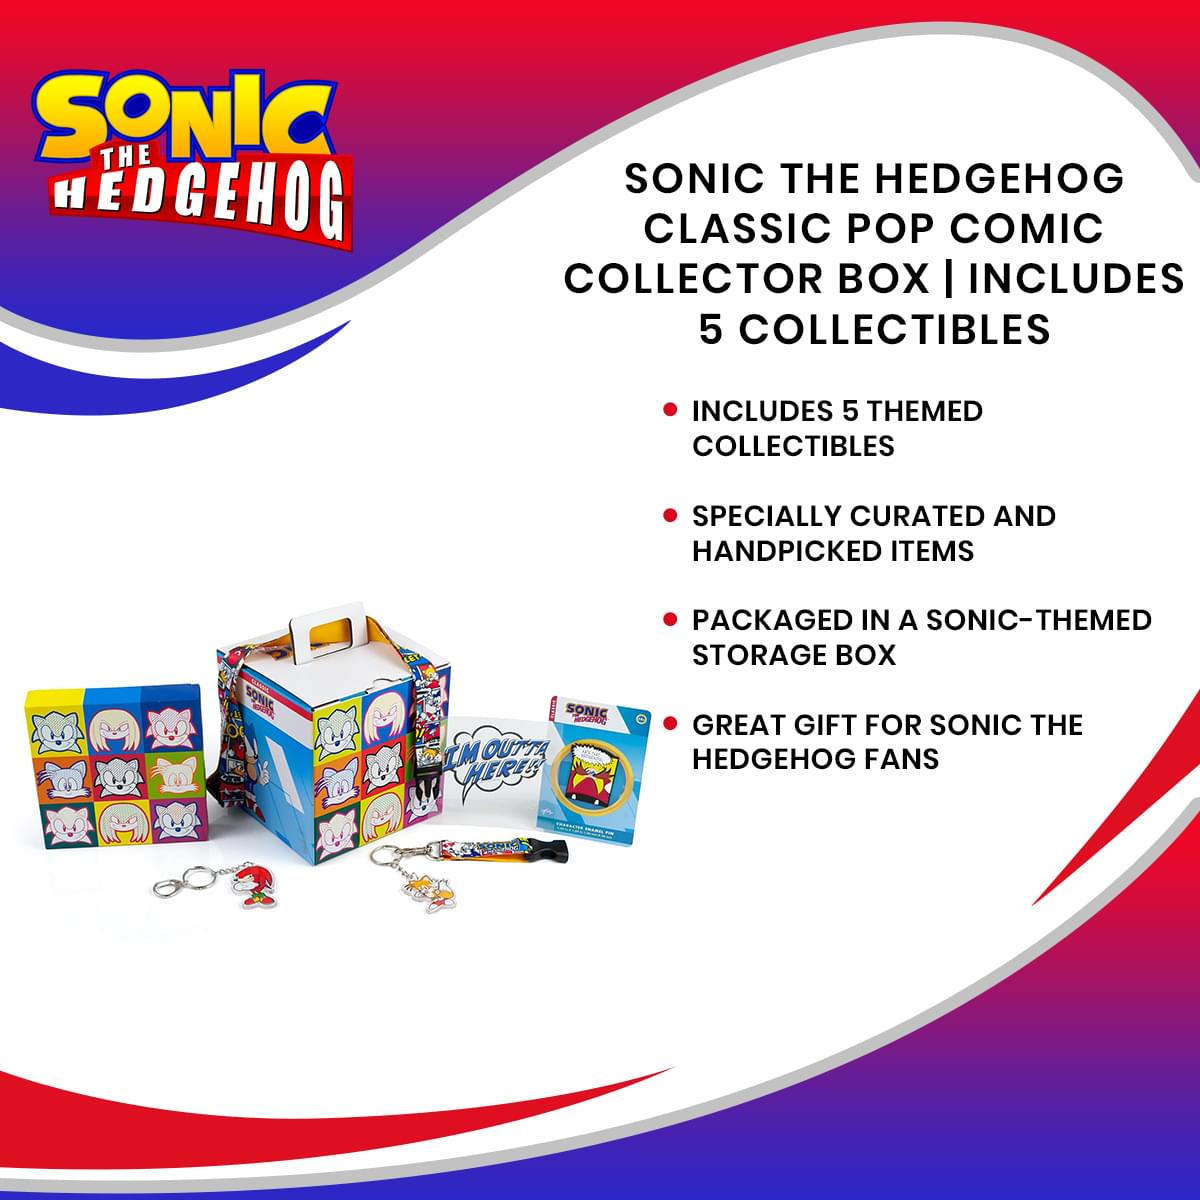 Sonic the Hedgehog Classic Pop Comic Collector Looksee Box | Includes 5 Collectibles